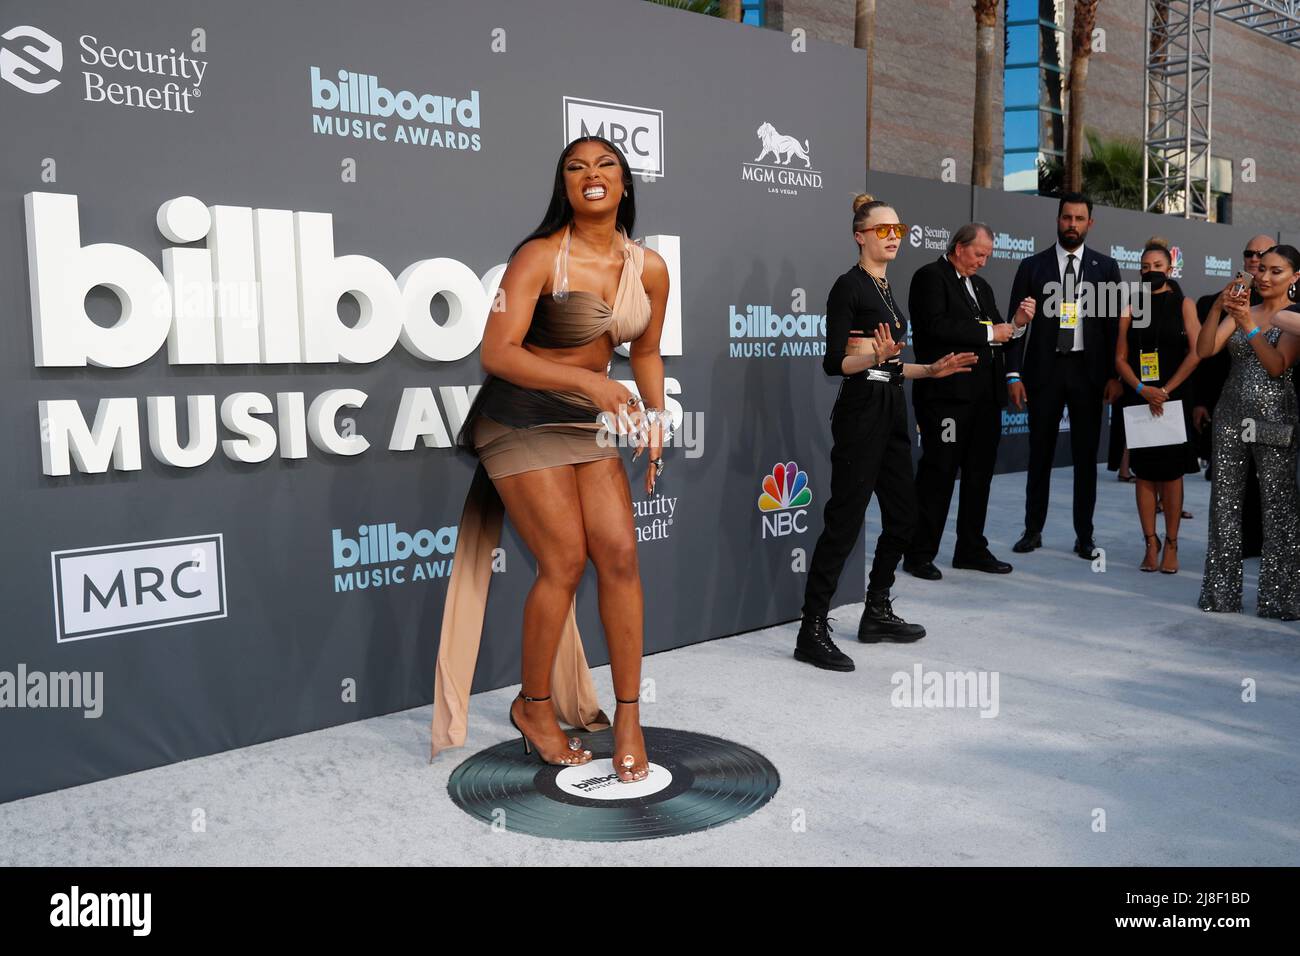 Megan Thee Stallion arrives to attend the 2022 Billboard Music Awards at MGM Grand Garden Arena in Las Vegas, Nevada, U.S. May 15, 2022. REUTERS/Steve Marcus Stock Photo